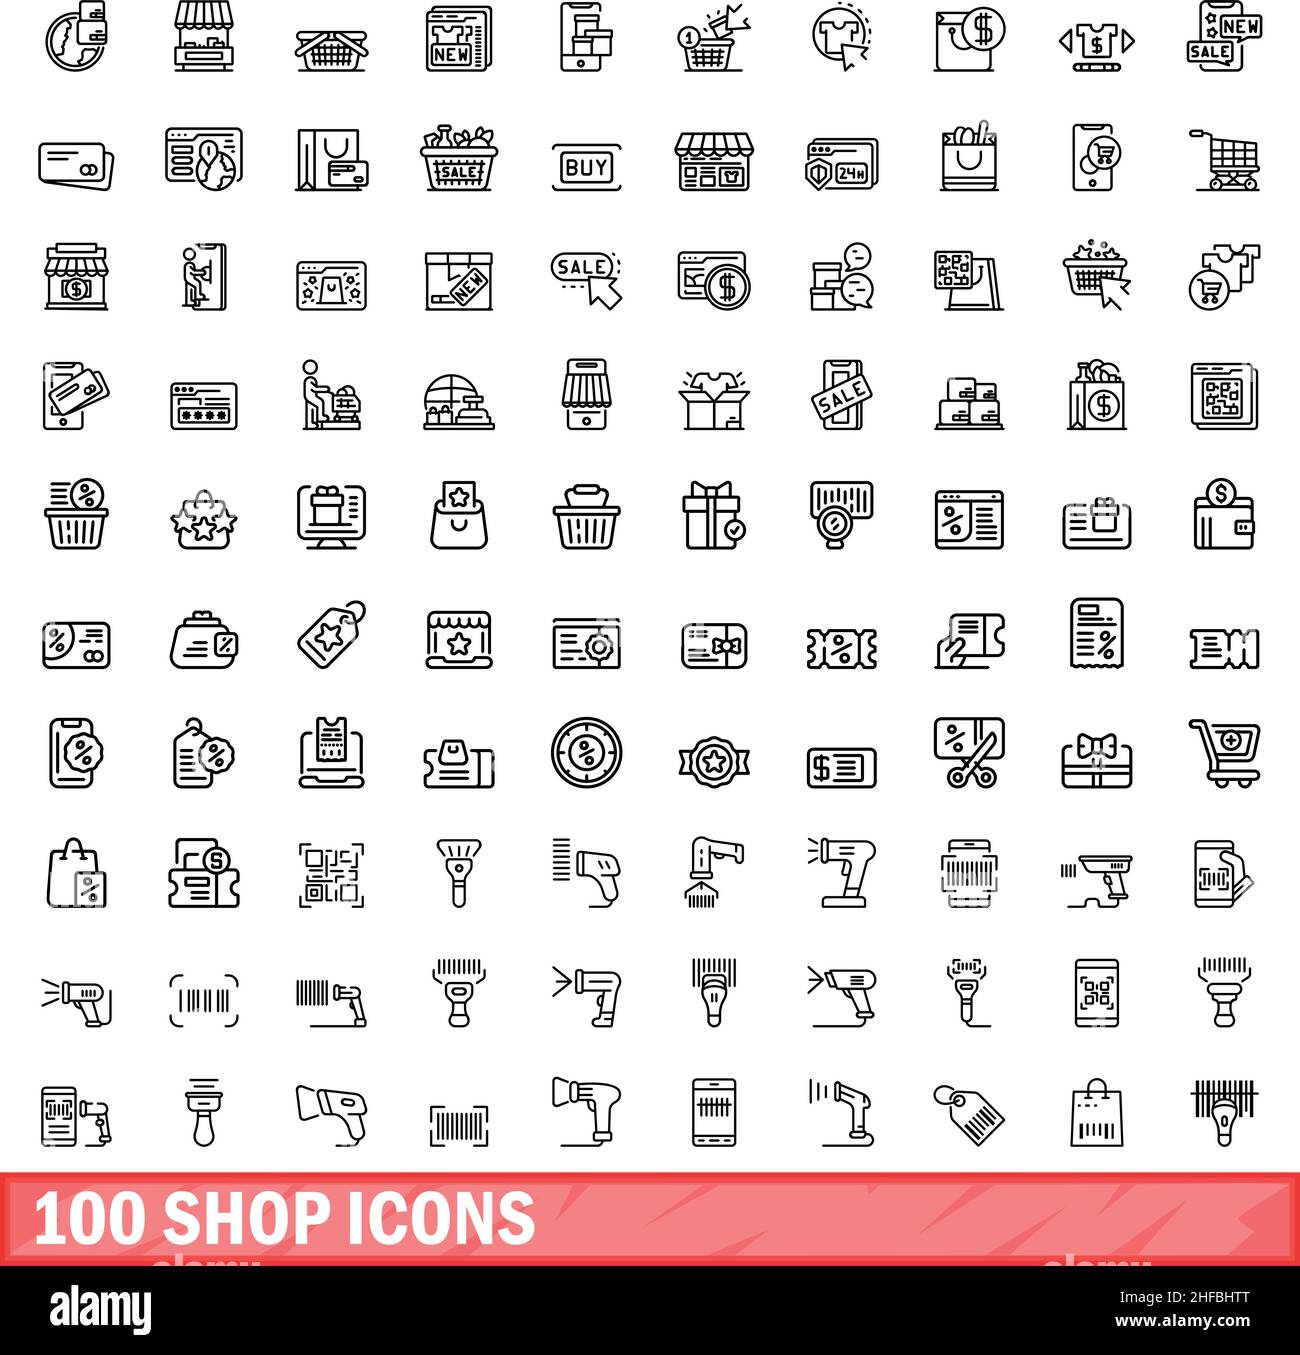 100 shop icons set. Outline illustration of 100 shop icons vector set isolated on white background Stock Vector